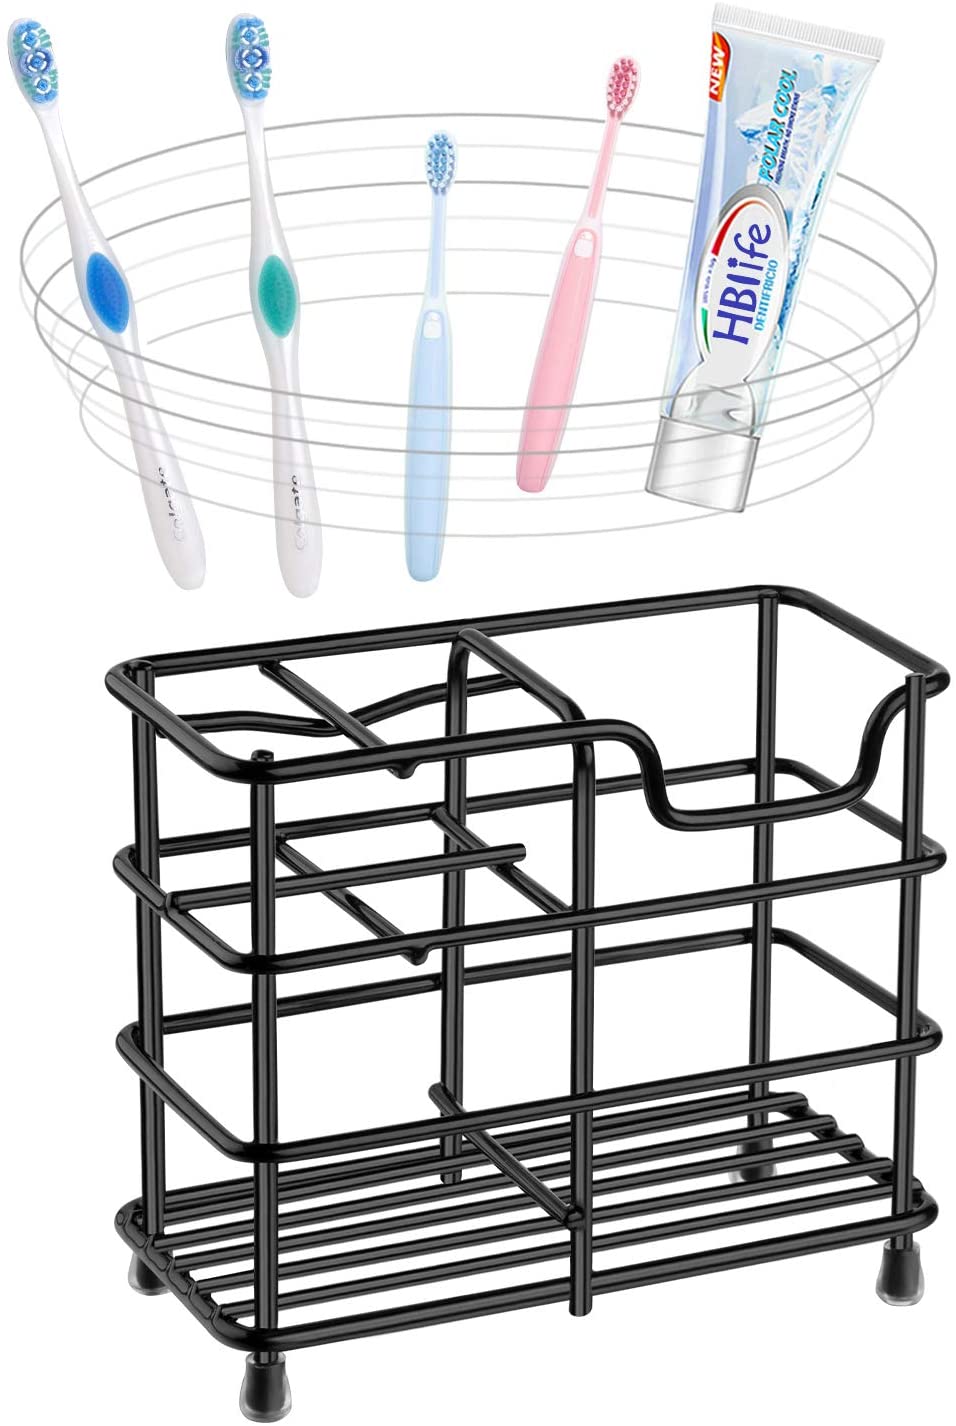 hblife Toothbrush Holder, Small Stainless Steel Toothpaste Holder Bathroom Accessories Organizer